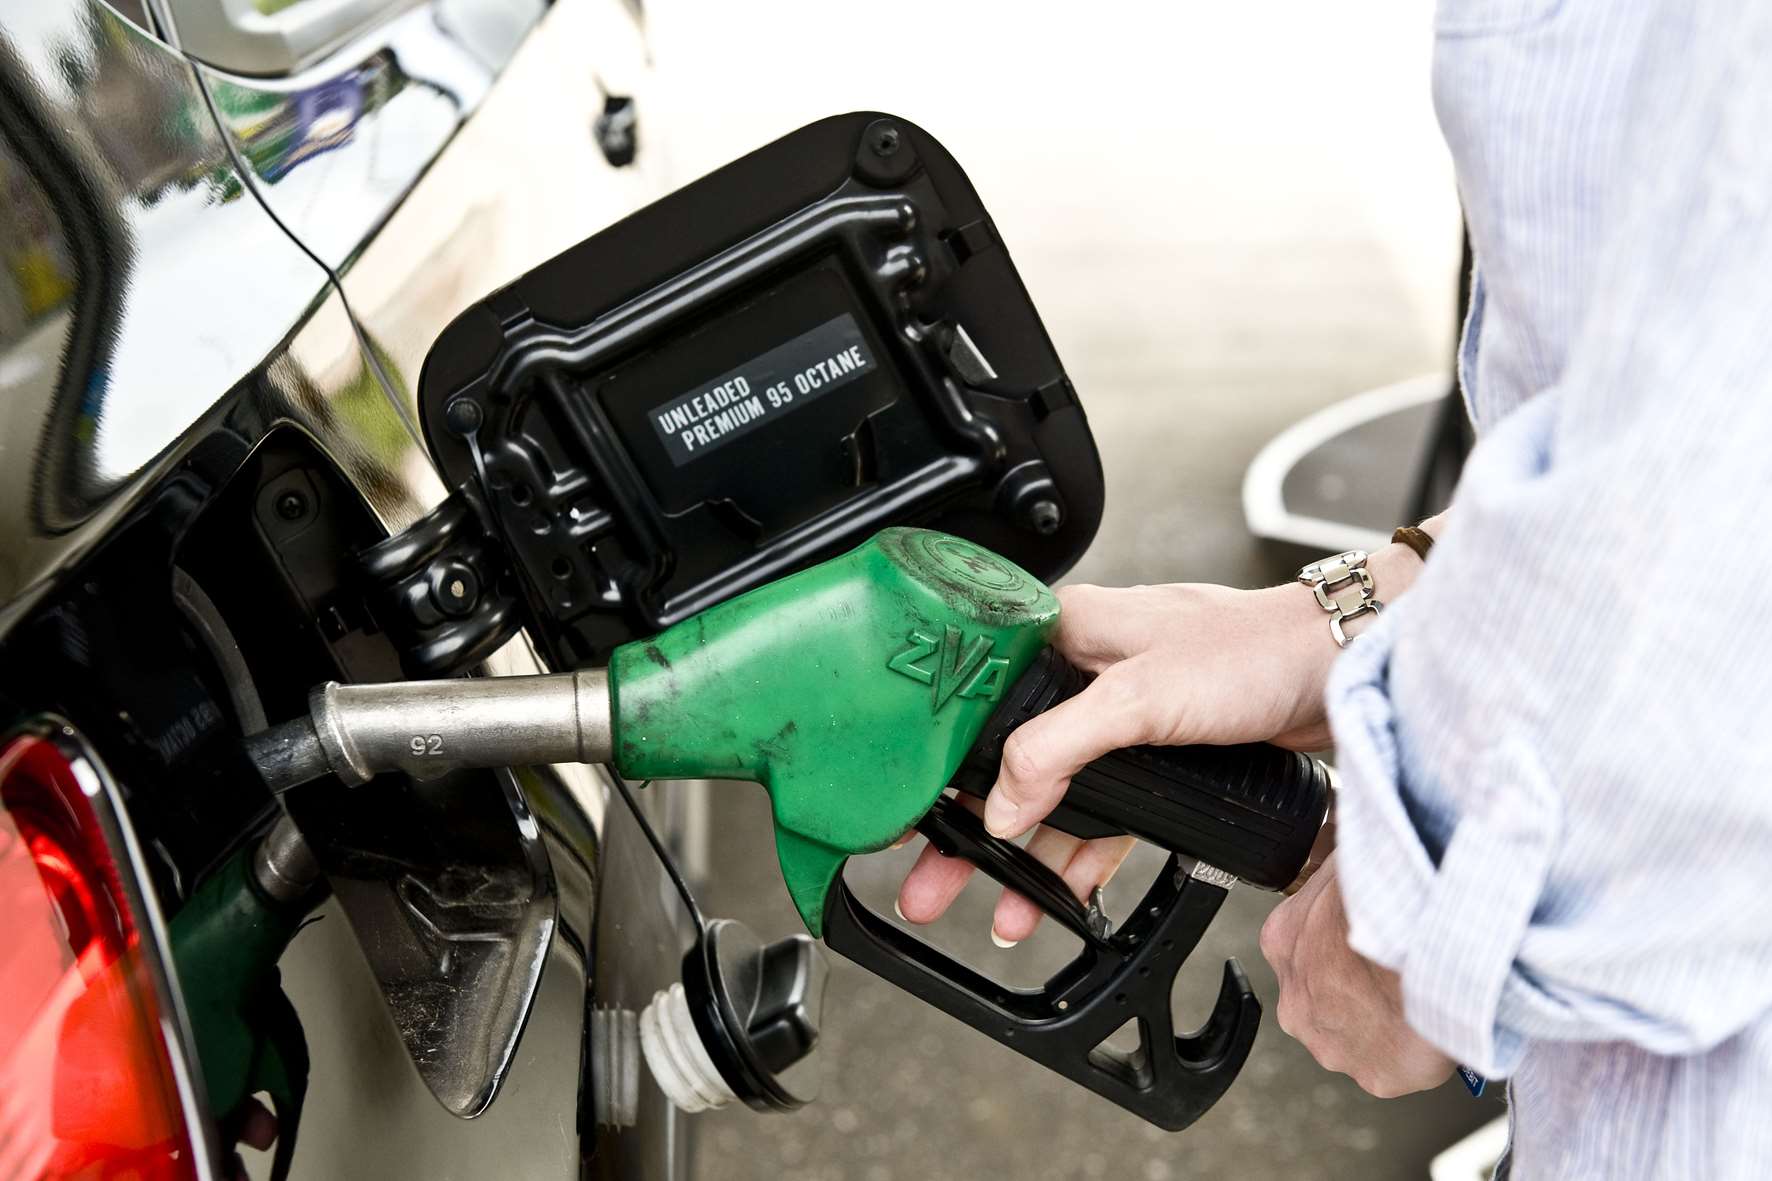 Pump prices are coming down